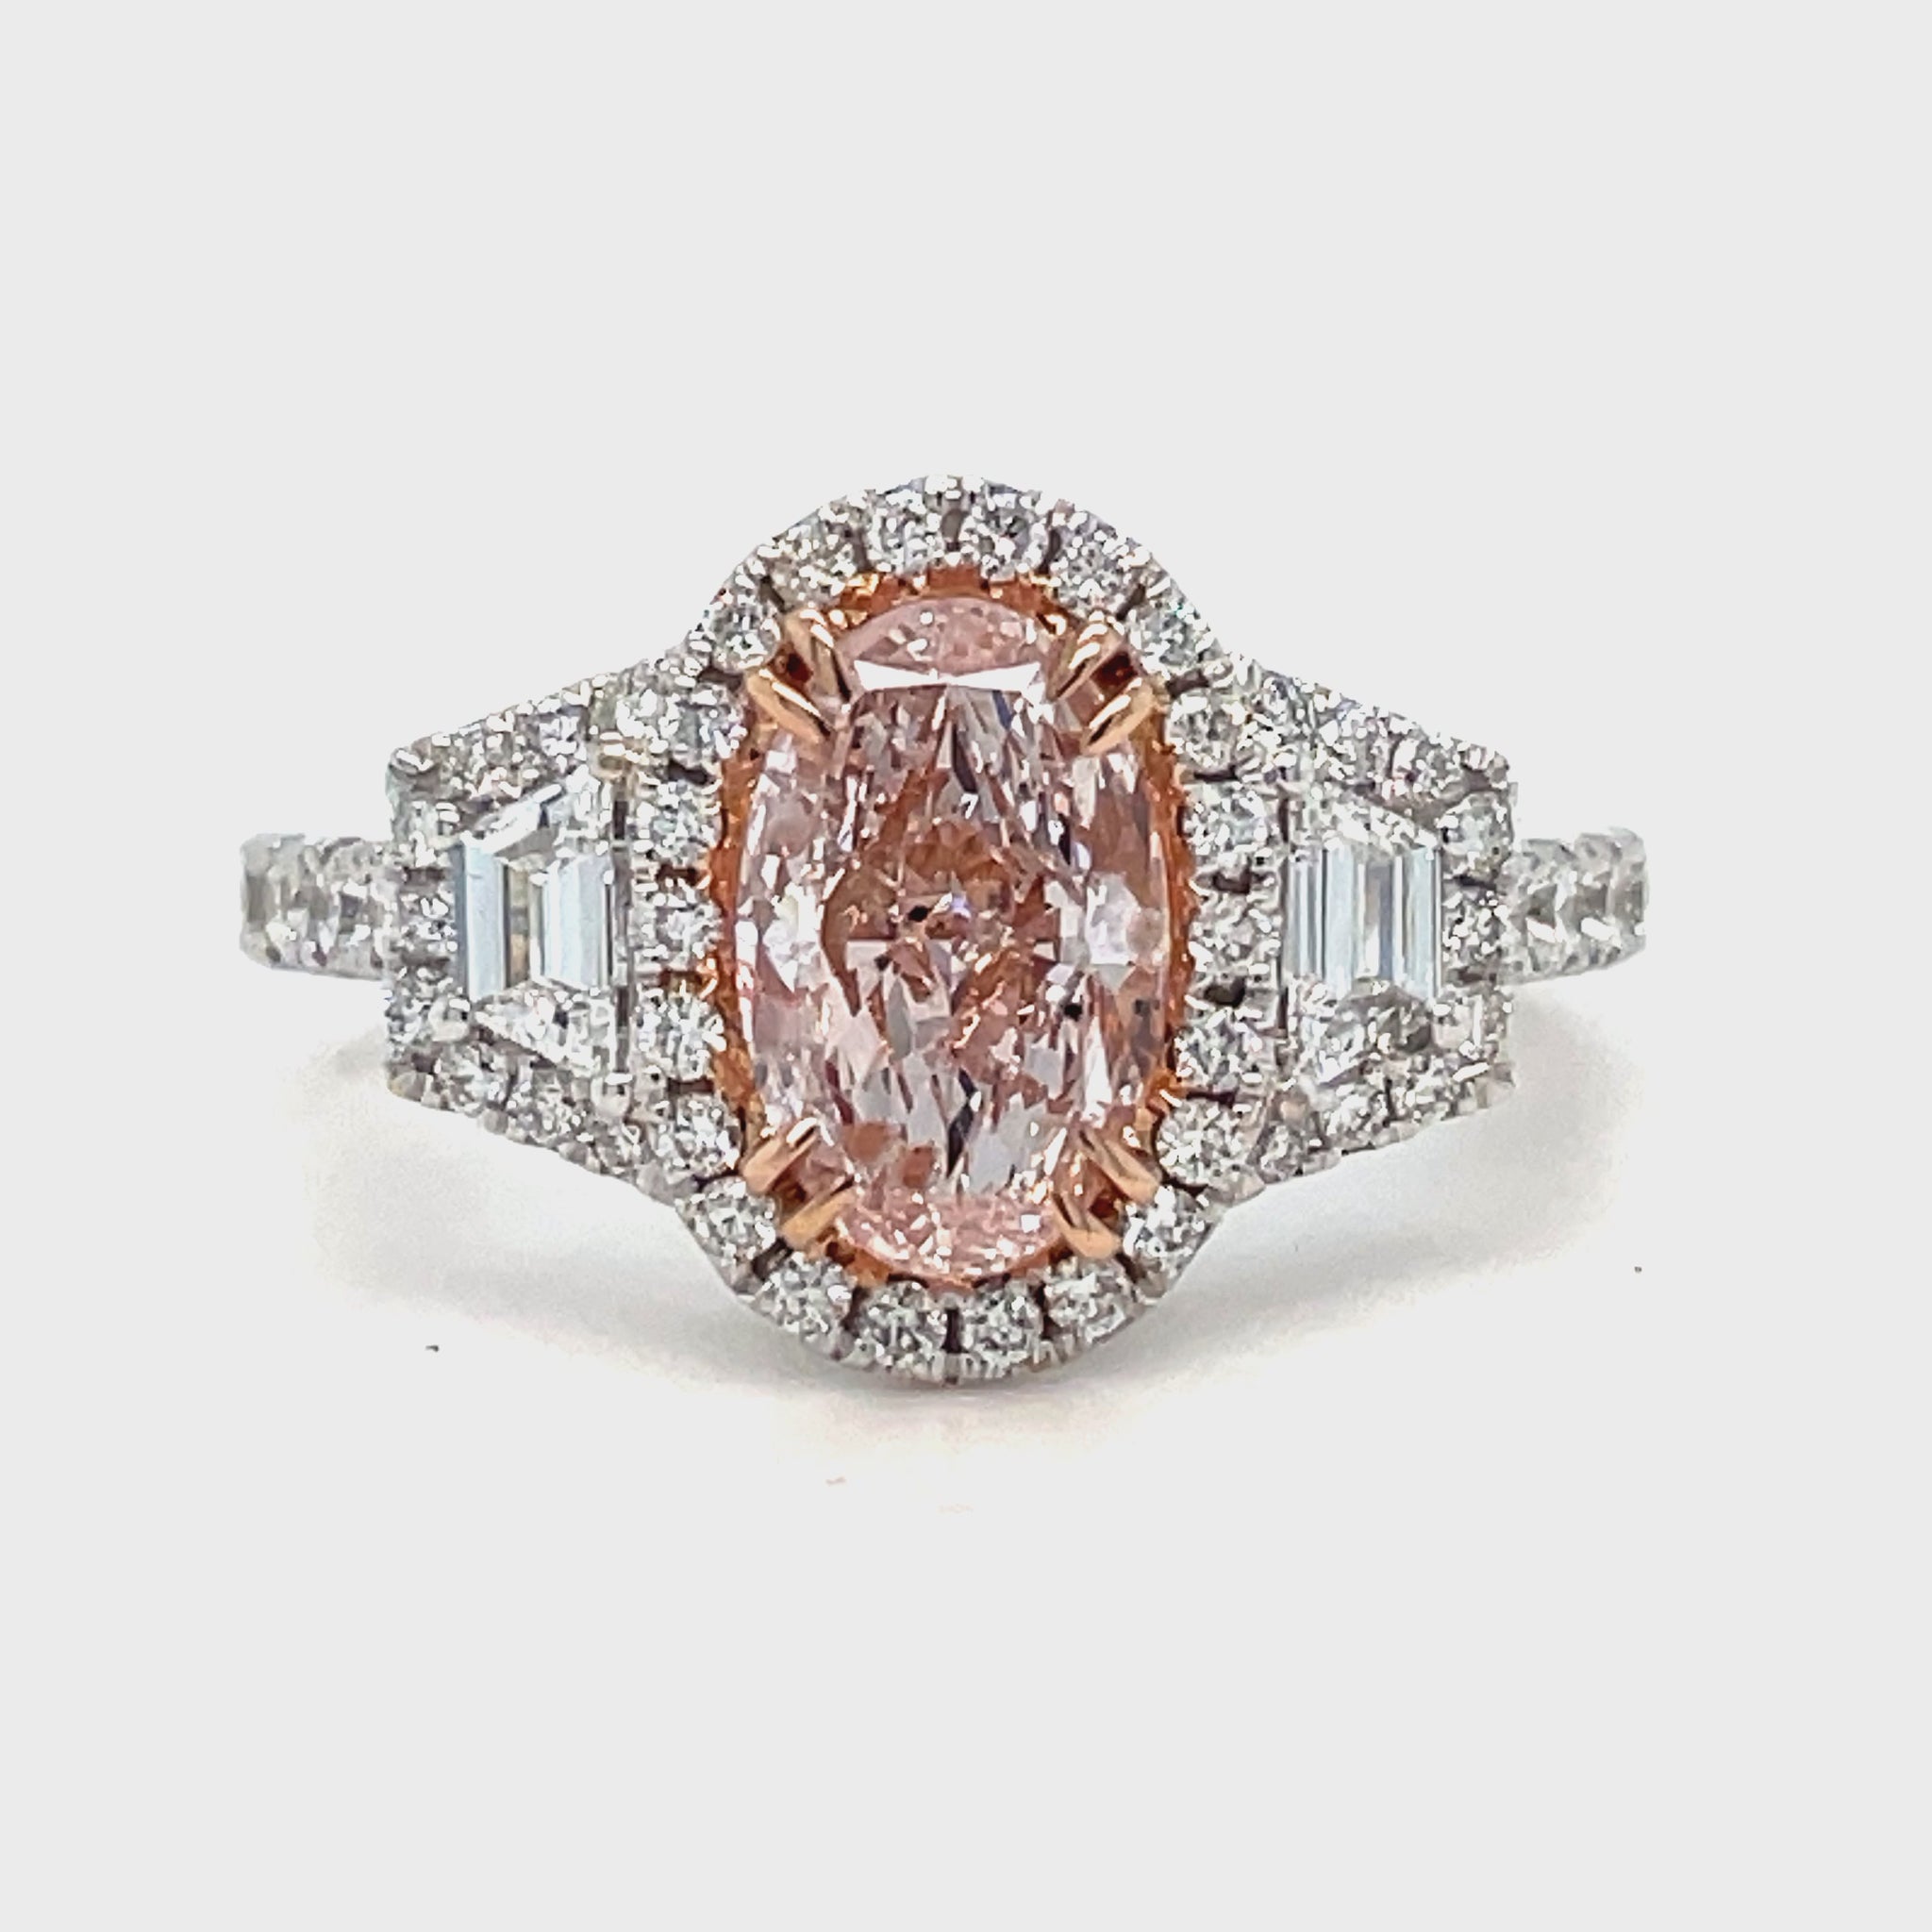 "Indulge in the rare beauty of our GIA certified 1.40 carat oval shaped pink diamond engagement ring. With two kite shaped diamonds and a round diamond bezel totaling 0.90 carats, this 18k white gold ring radiates sophistication and luxury. Make every moment sparkle with this stunning, one-of-a-kind piece."